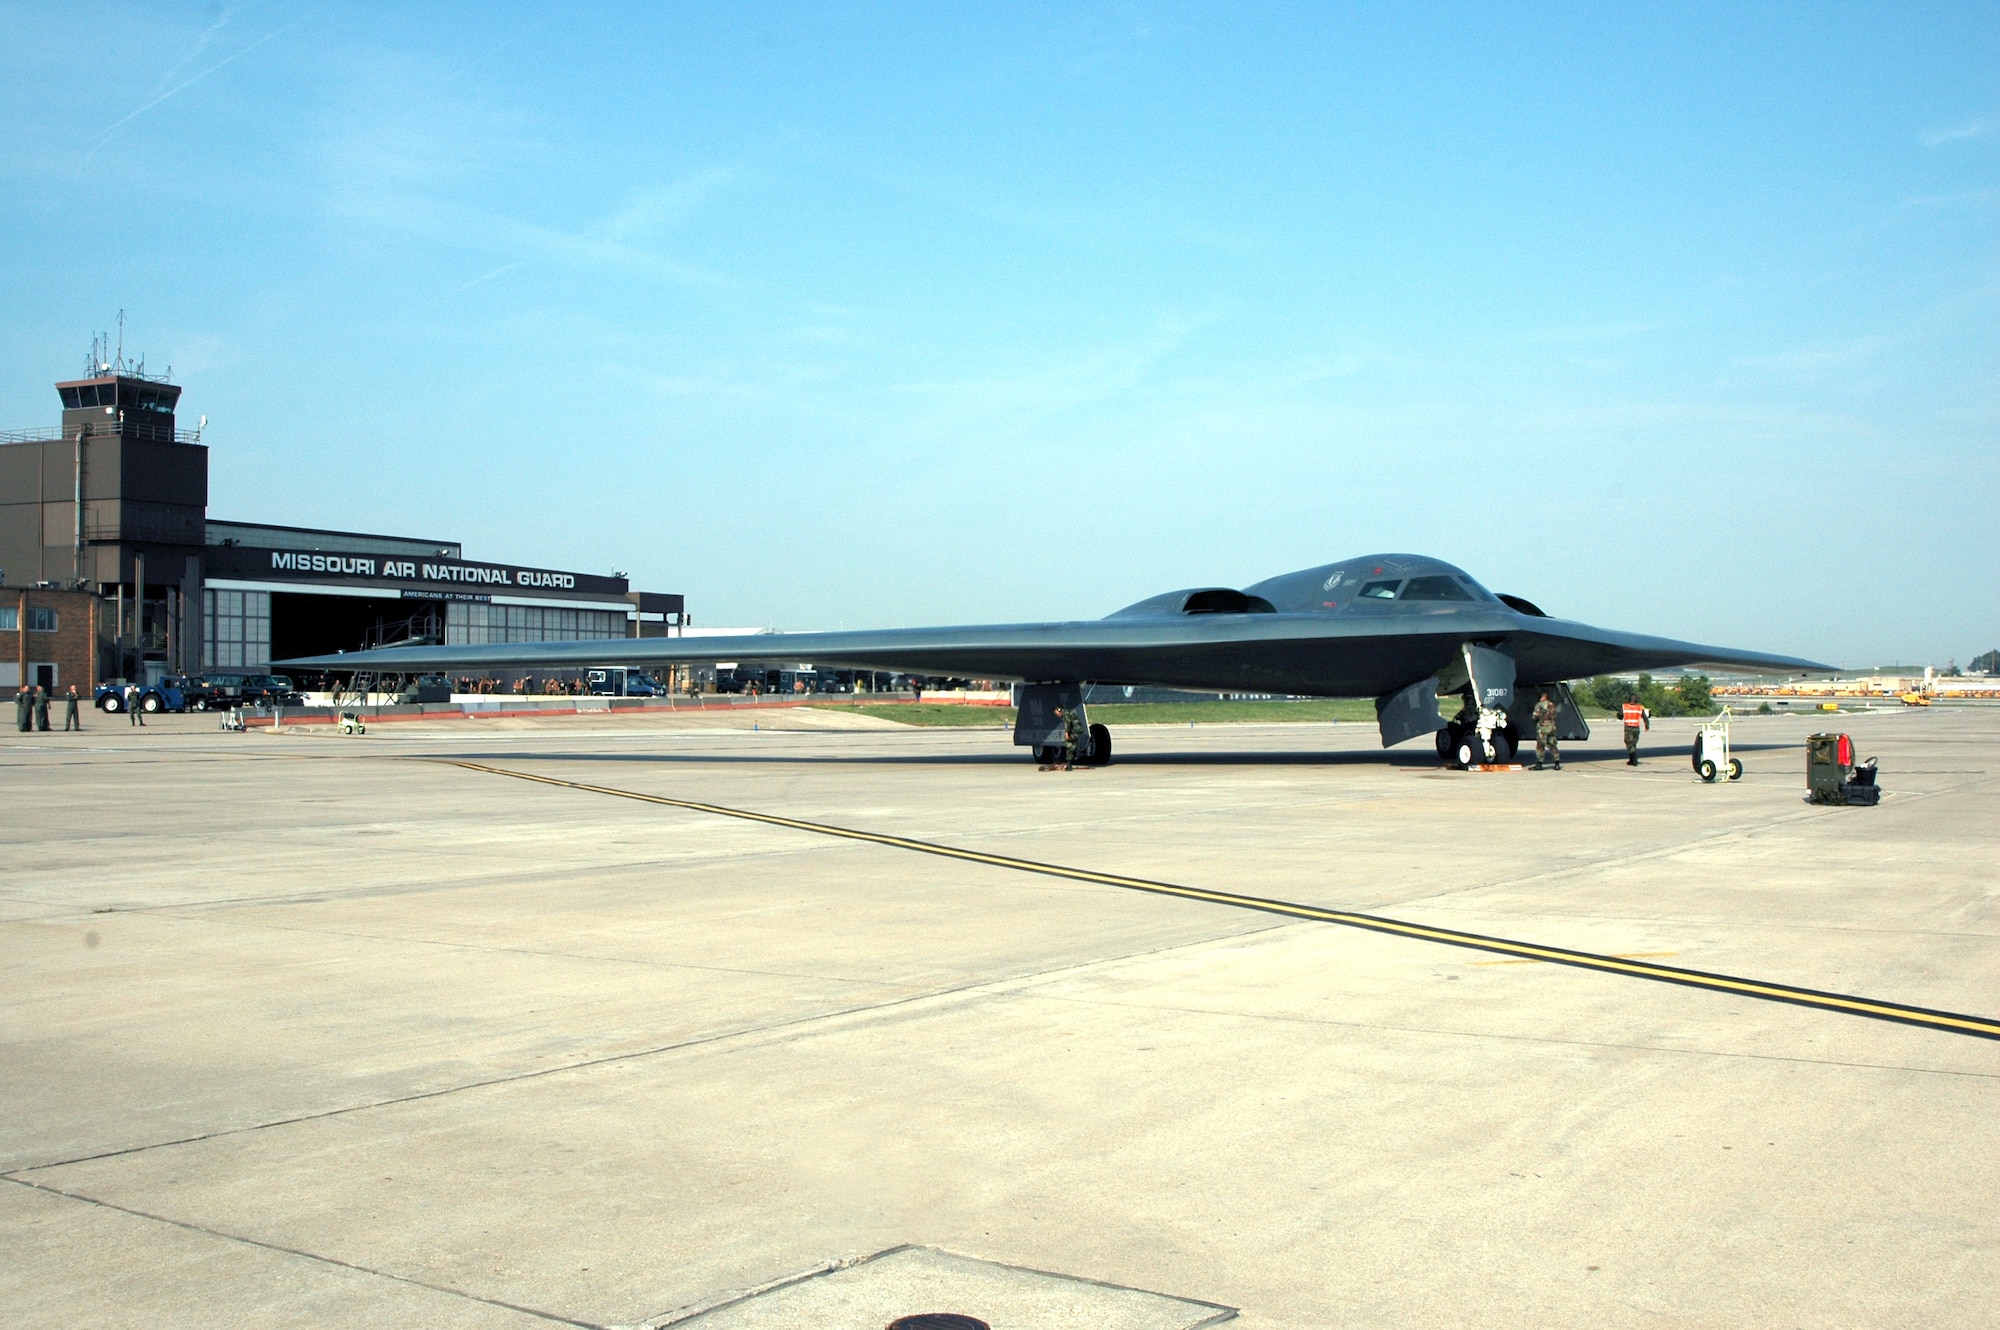 A B-2 Spirit stealth bomber sits on the tarmac at the 131st Fighter Wing at Lambert International Airport in St. Louis Sept. 9. (U.S. Air Force photo/Master Sgt. Mary-Dale Amison)